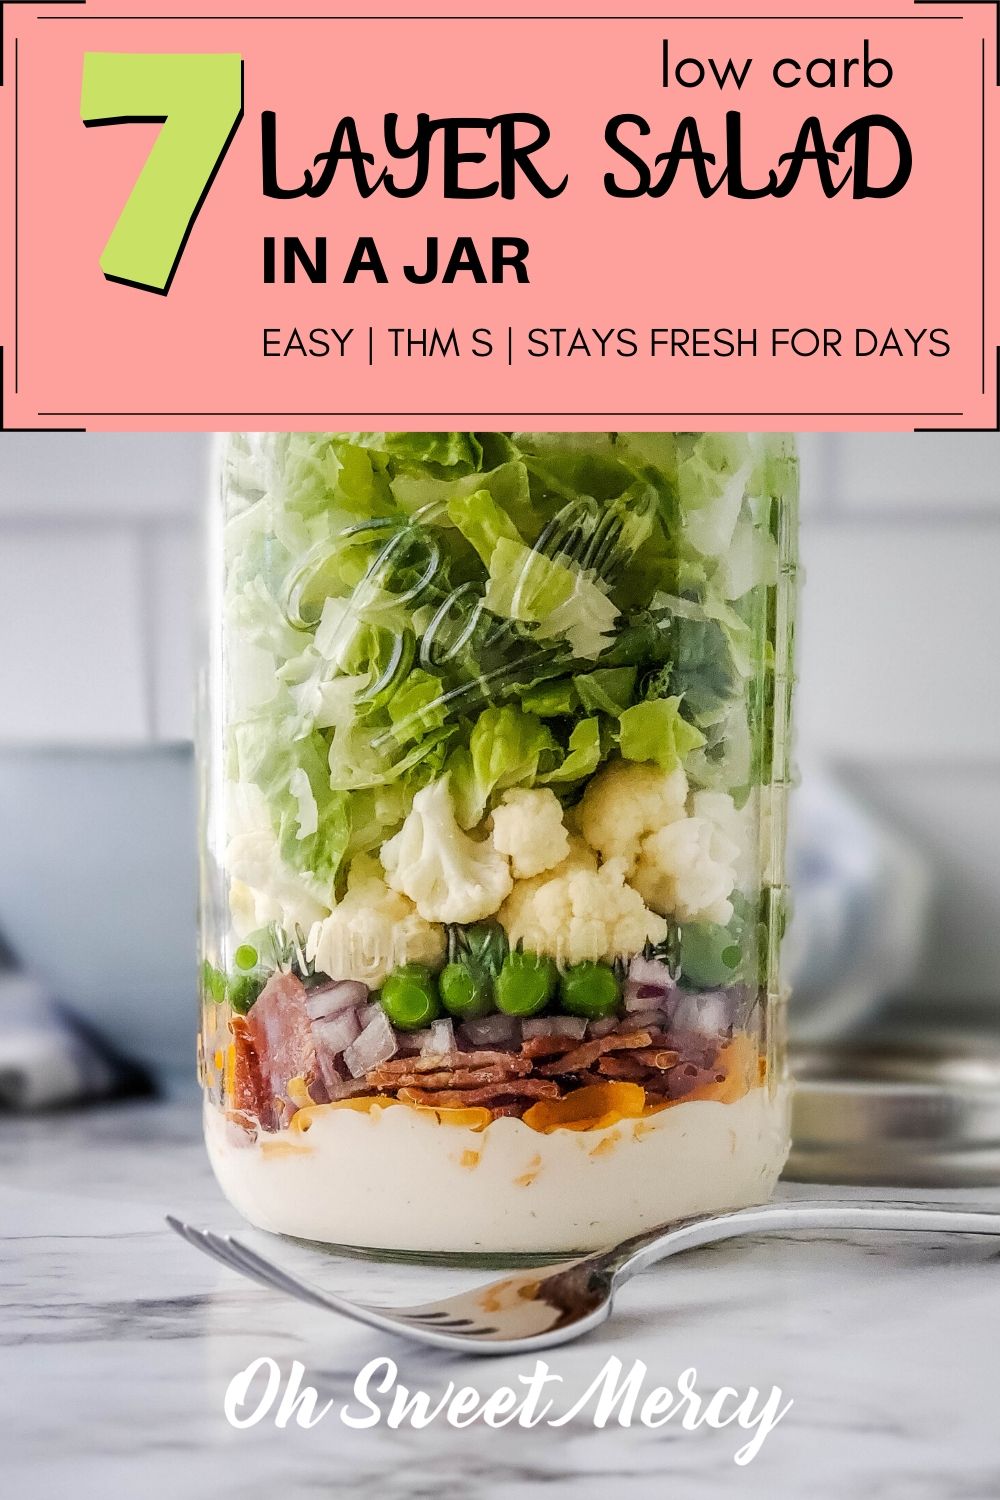 Make my easy, low carb 7 Layer Salad In A Jar for quick and easy meals this summer! Keeps for days in the fridge and ready when you are. #lowcarb #sugarfree #thm #keto #salads #masonjarsalad #saladinajar @ohsweetmercy